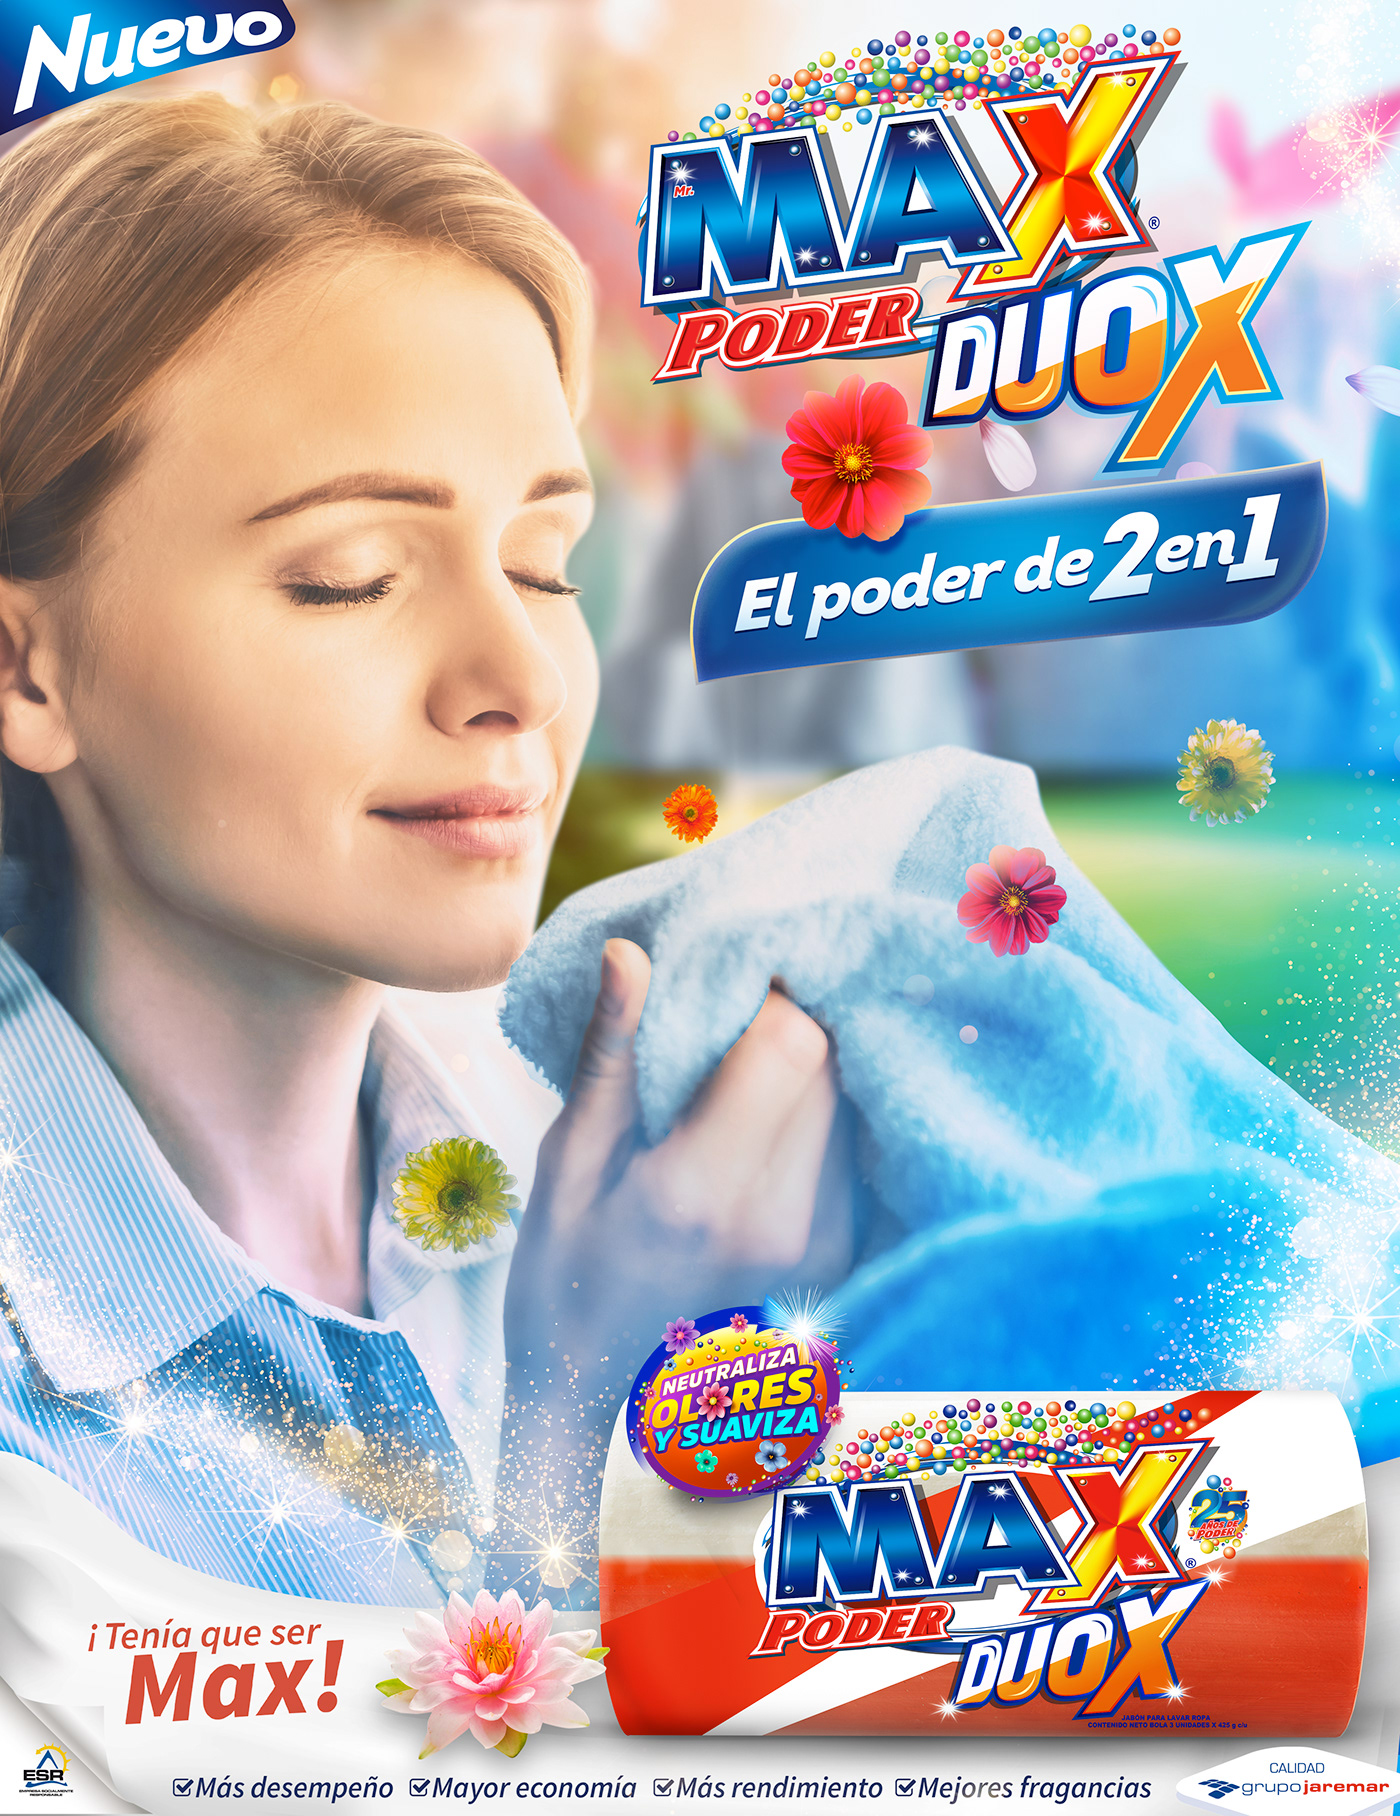 Mr Duox detergent limpieza cleaning product product for clothes